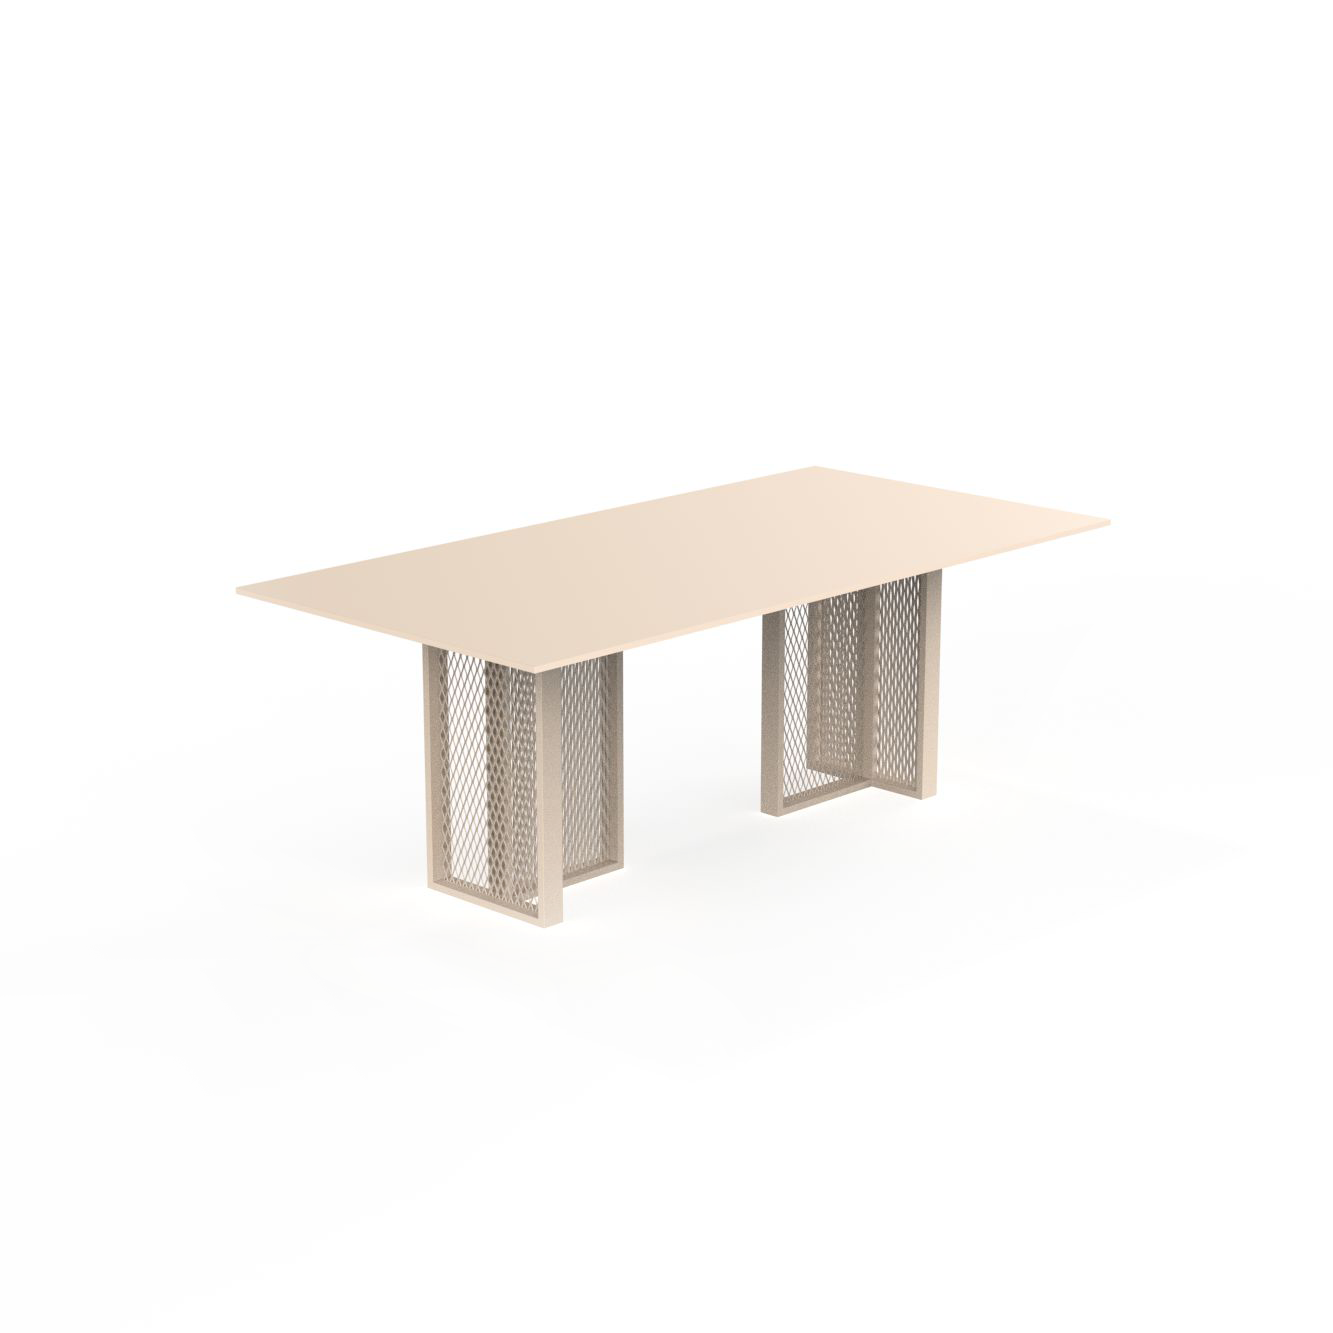 THE FACTORY DINING TABLE 200x120